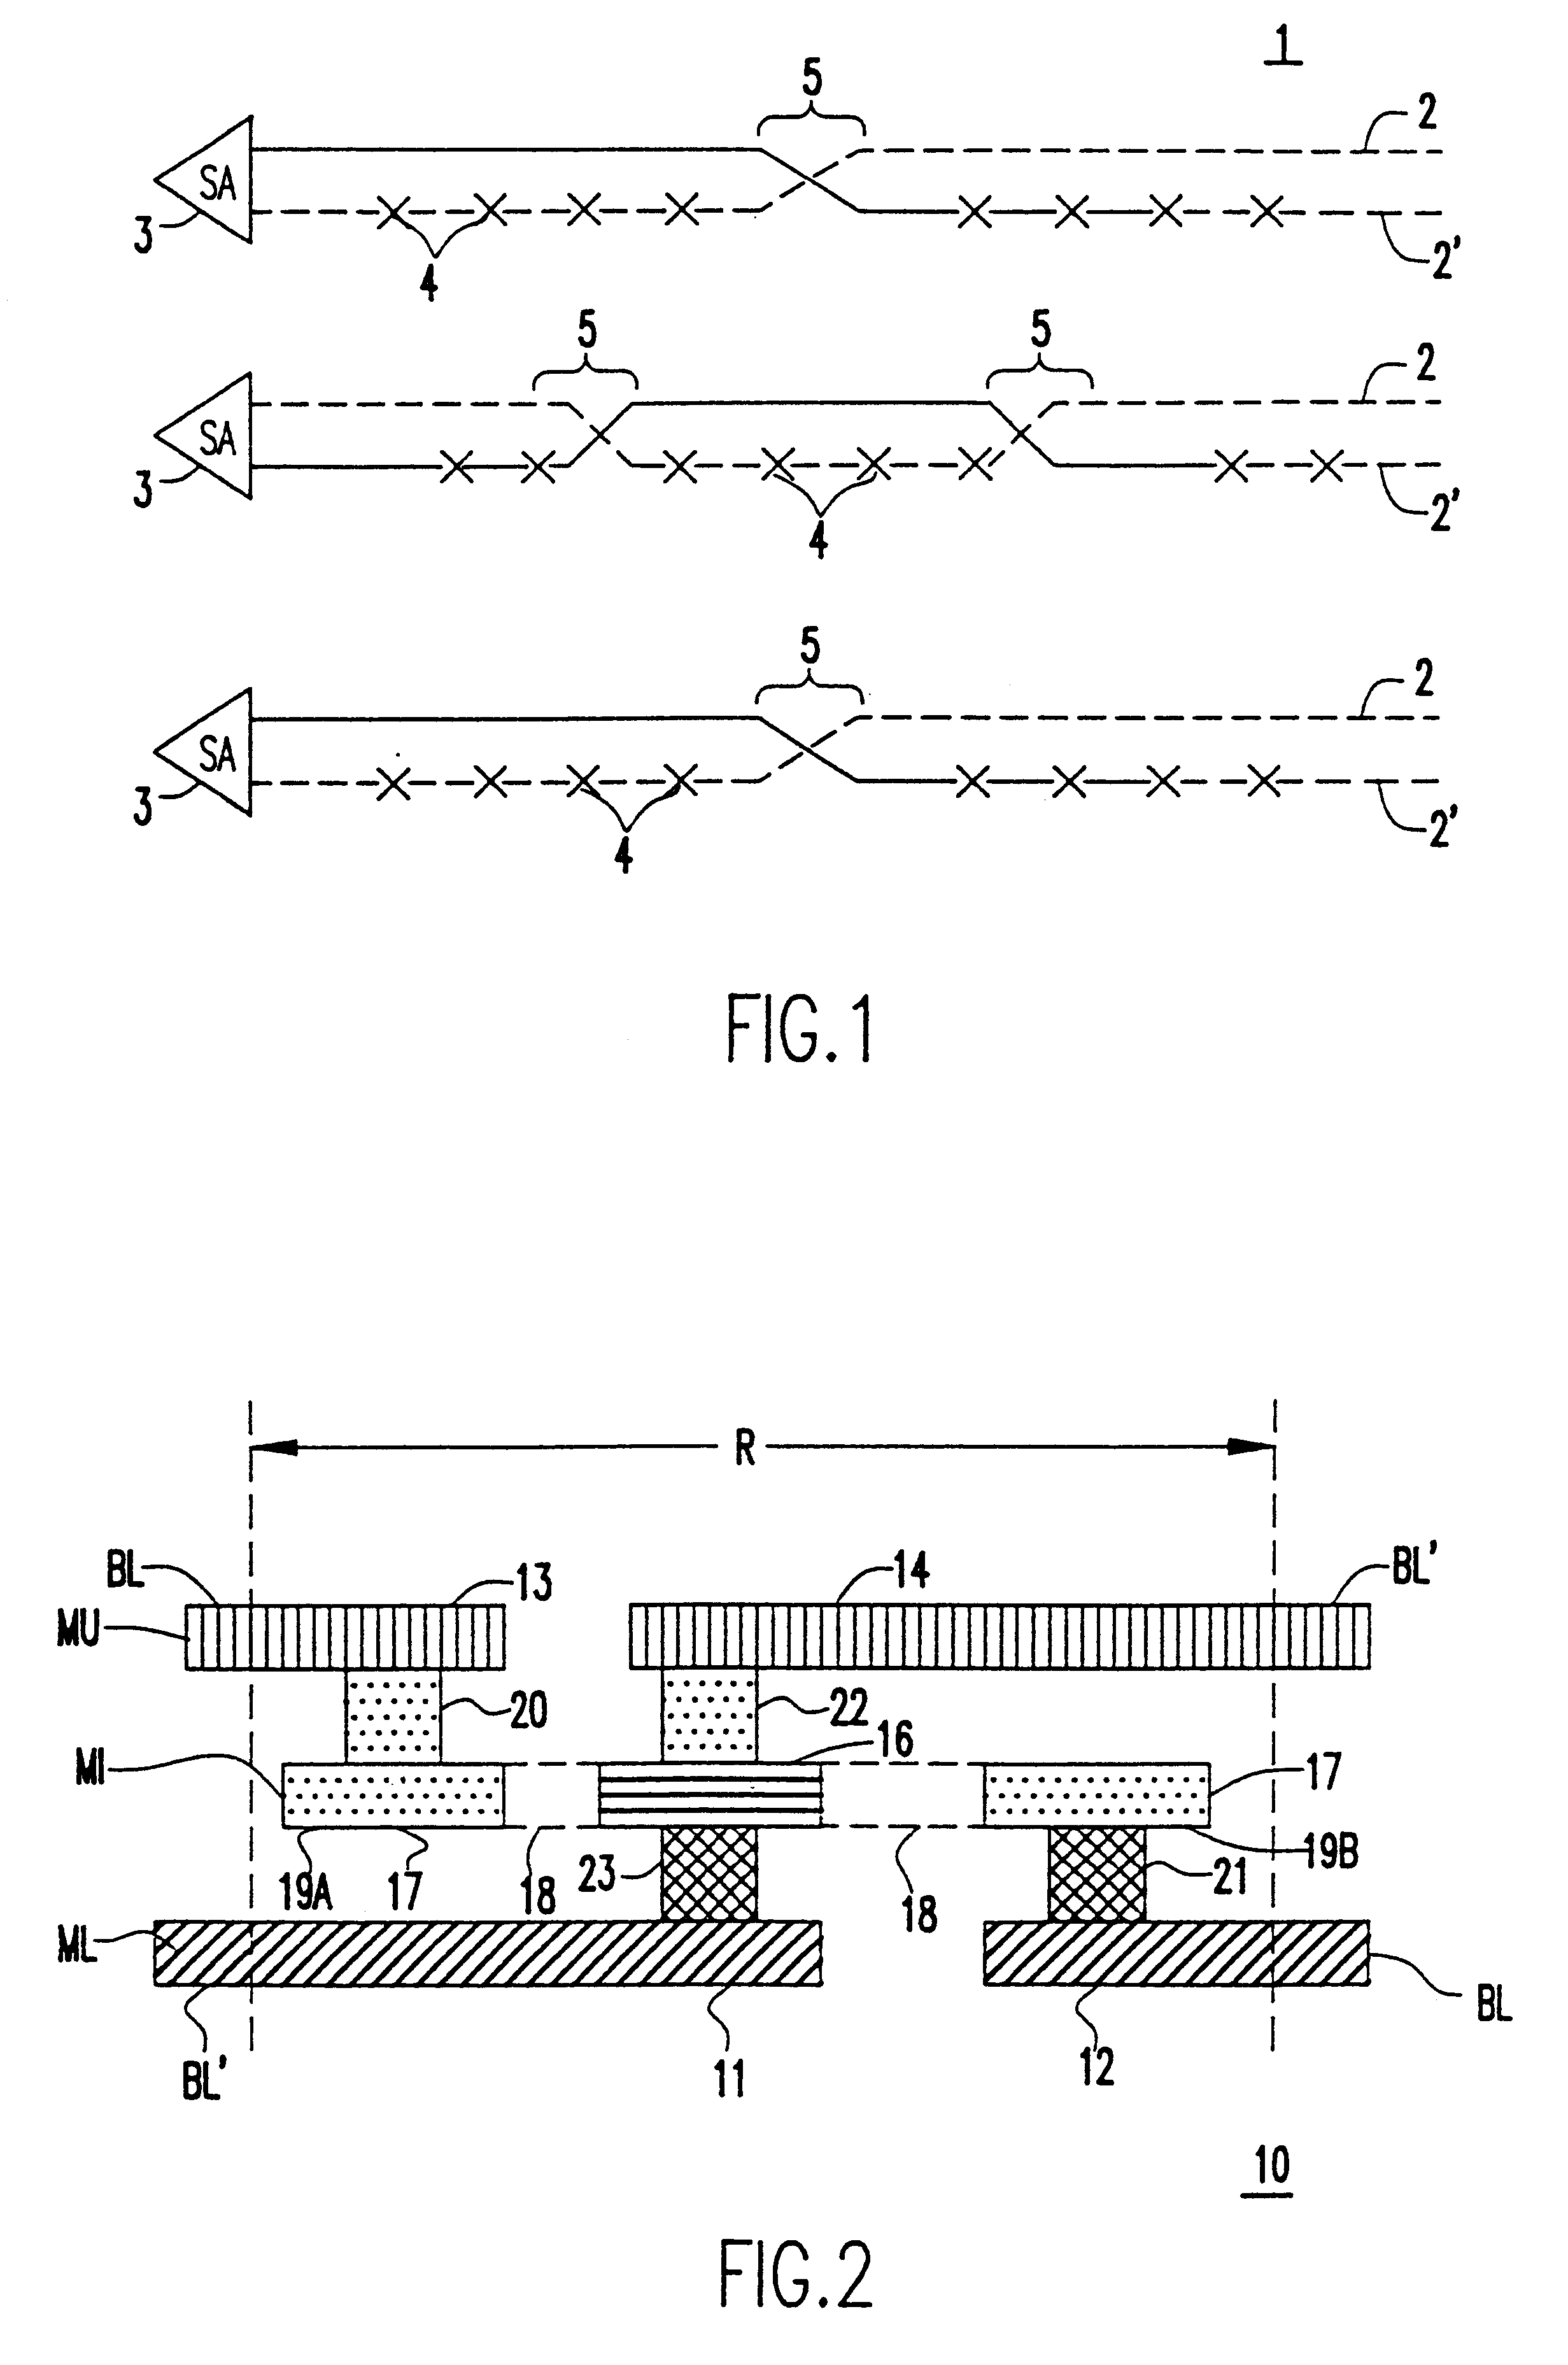 Storage-capacitor electrode and interconnect